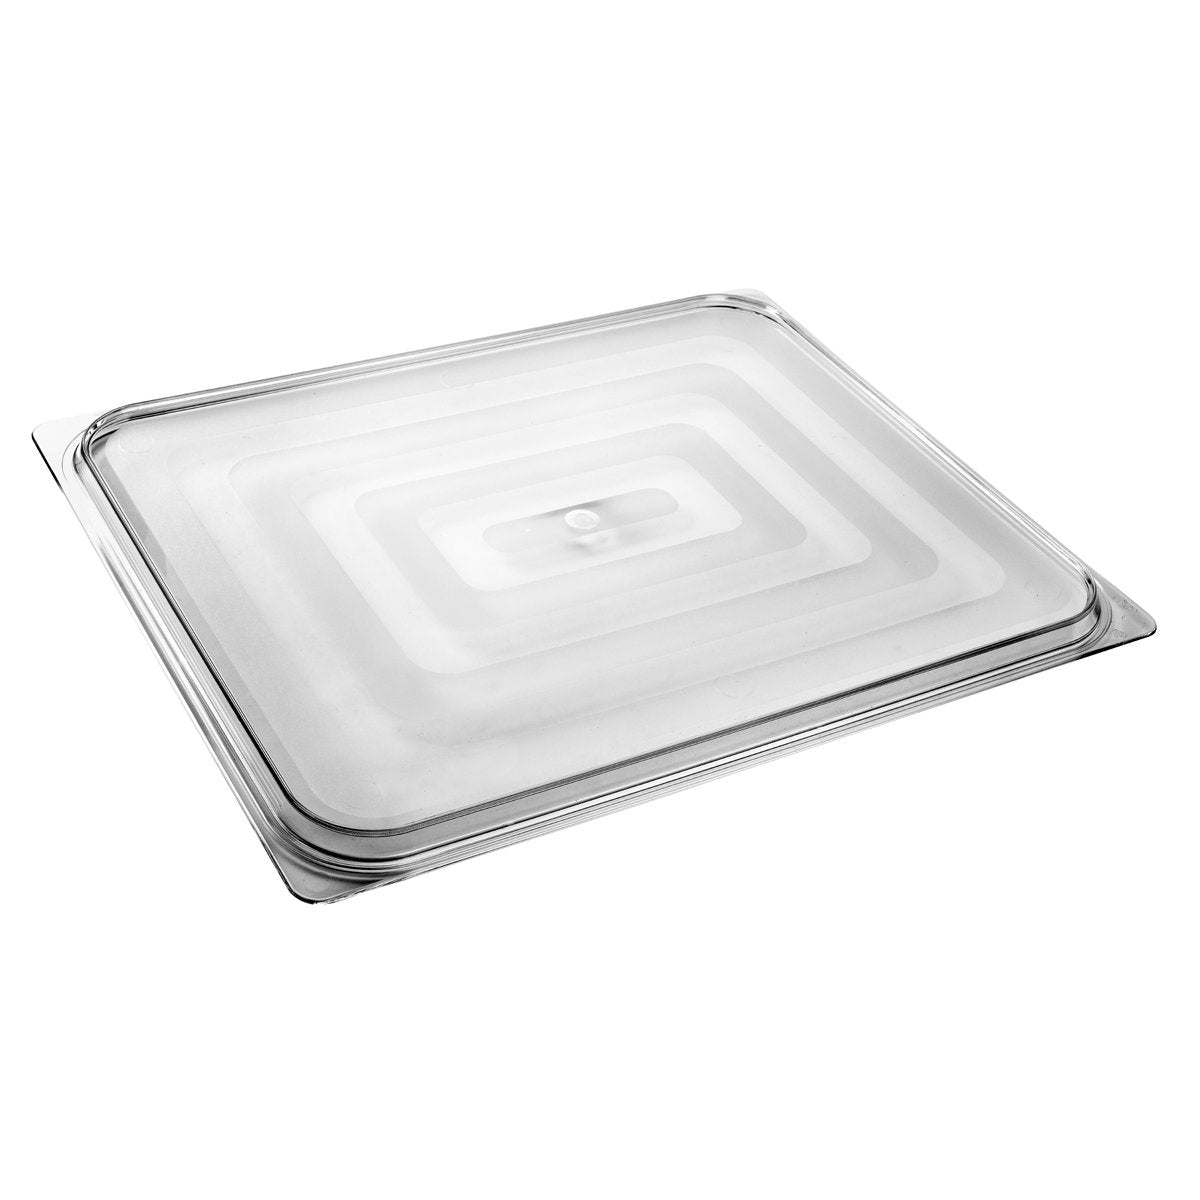 PC-21CL Inox Macel Gastronorm Pan Polycarbonate onate Lid Clear 2/1 Size Tomkin Australia Hospitality Supplies